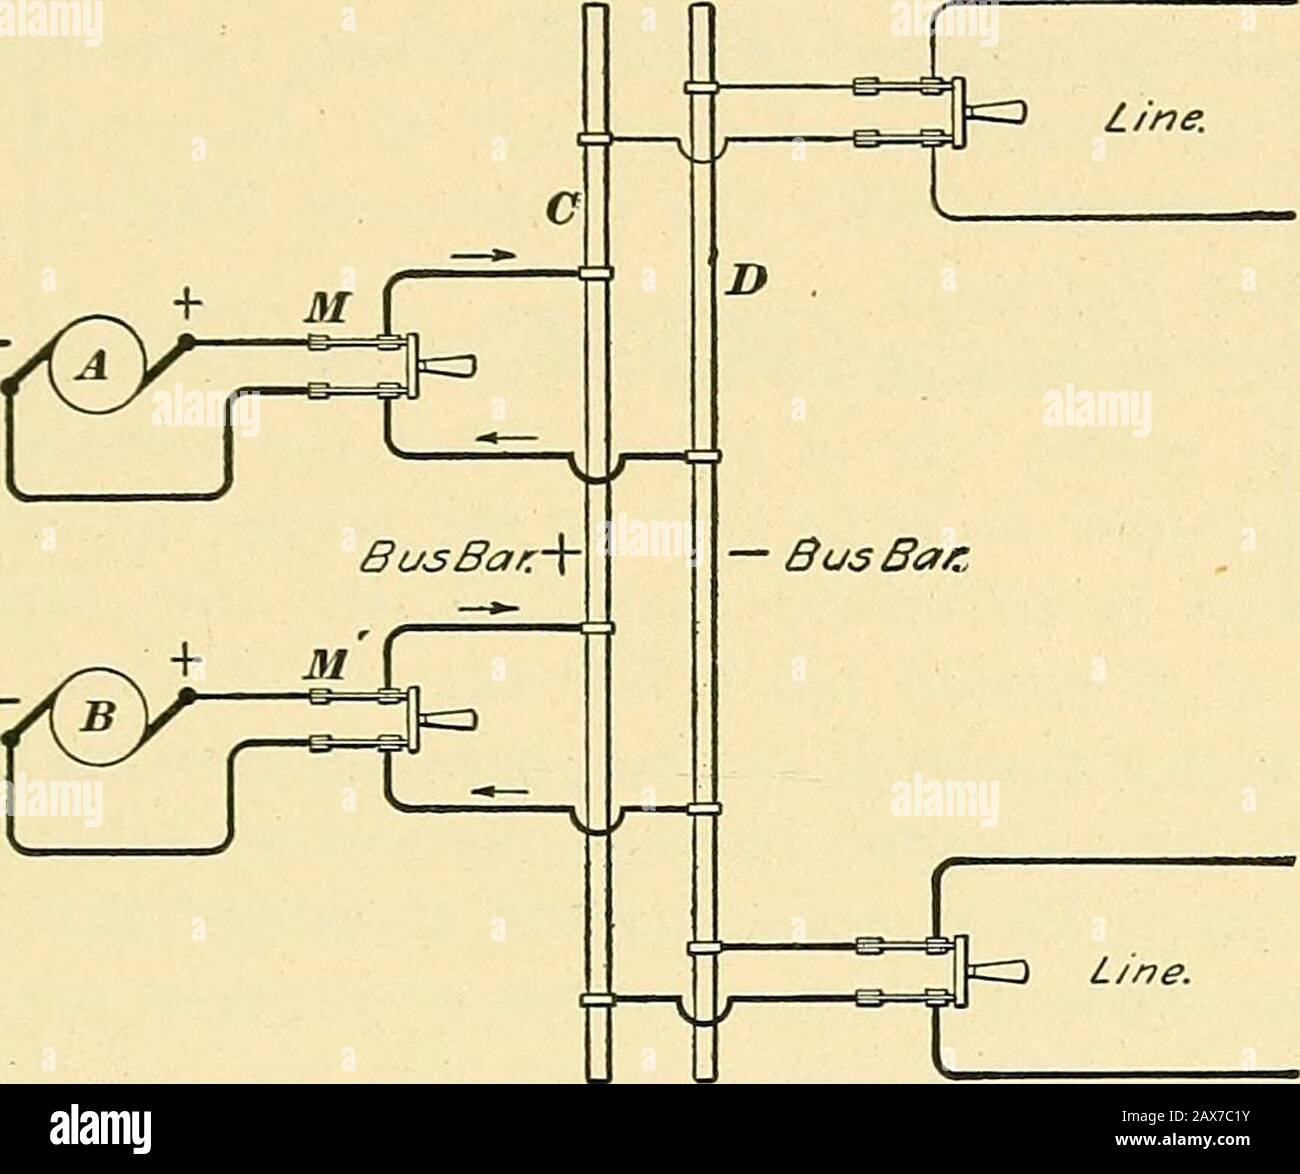 [Electric engineering.] . arc-light circuits, where a highvoltage may be required for operating a large number oflamps in series. ALTERNATORS. 76. Alternators cannot be run in series unless theirarmatures are rigidly connected by being mounted on thesame shaft, so that the E. M. F.s generated by the twomachines will always preserve exactly the same relationwith regard to each other. If the machines are drivenseparately, the E. M. F.s may aid each other at one instantand oppose each other the next, thus making their opera-tion unstable. For this reason alternators are very seldomoperated in ser Stock Photo